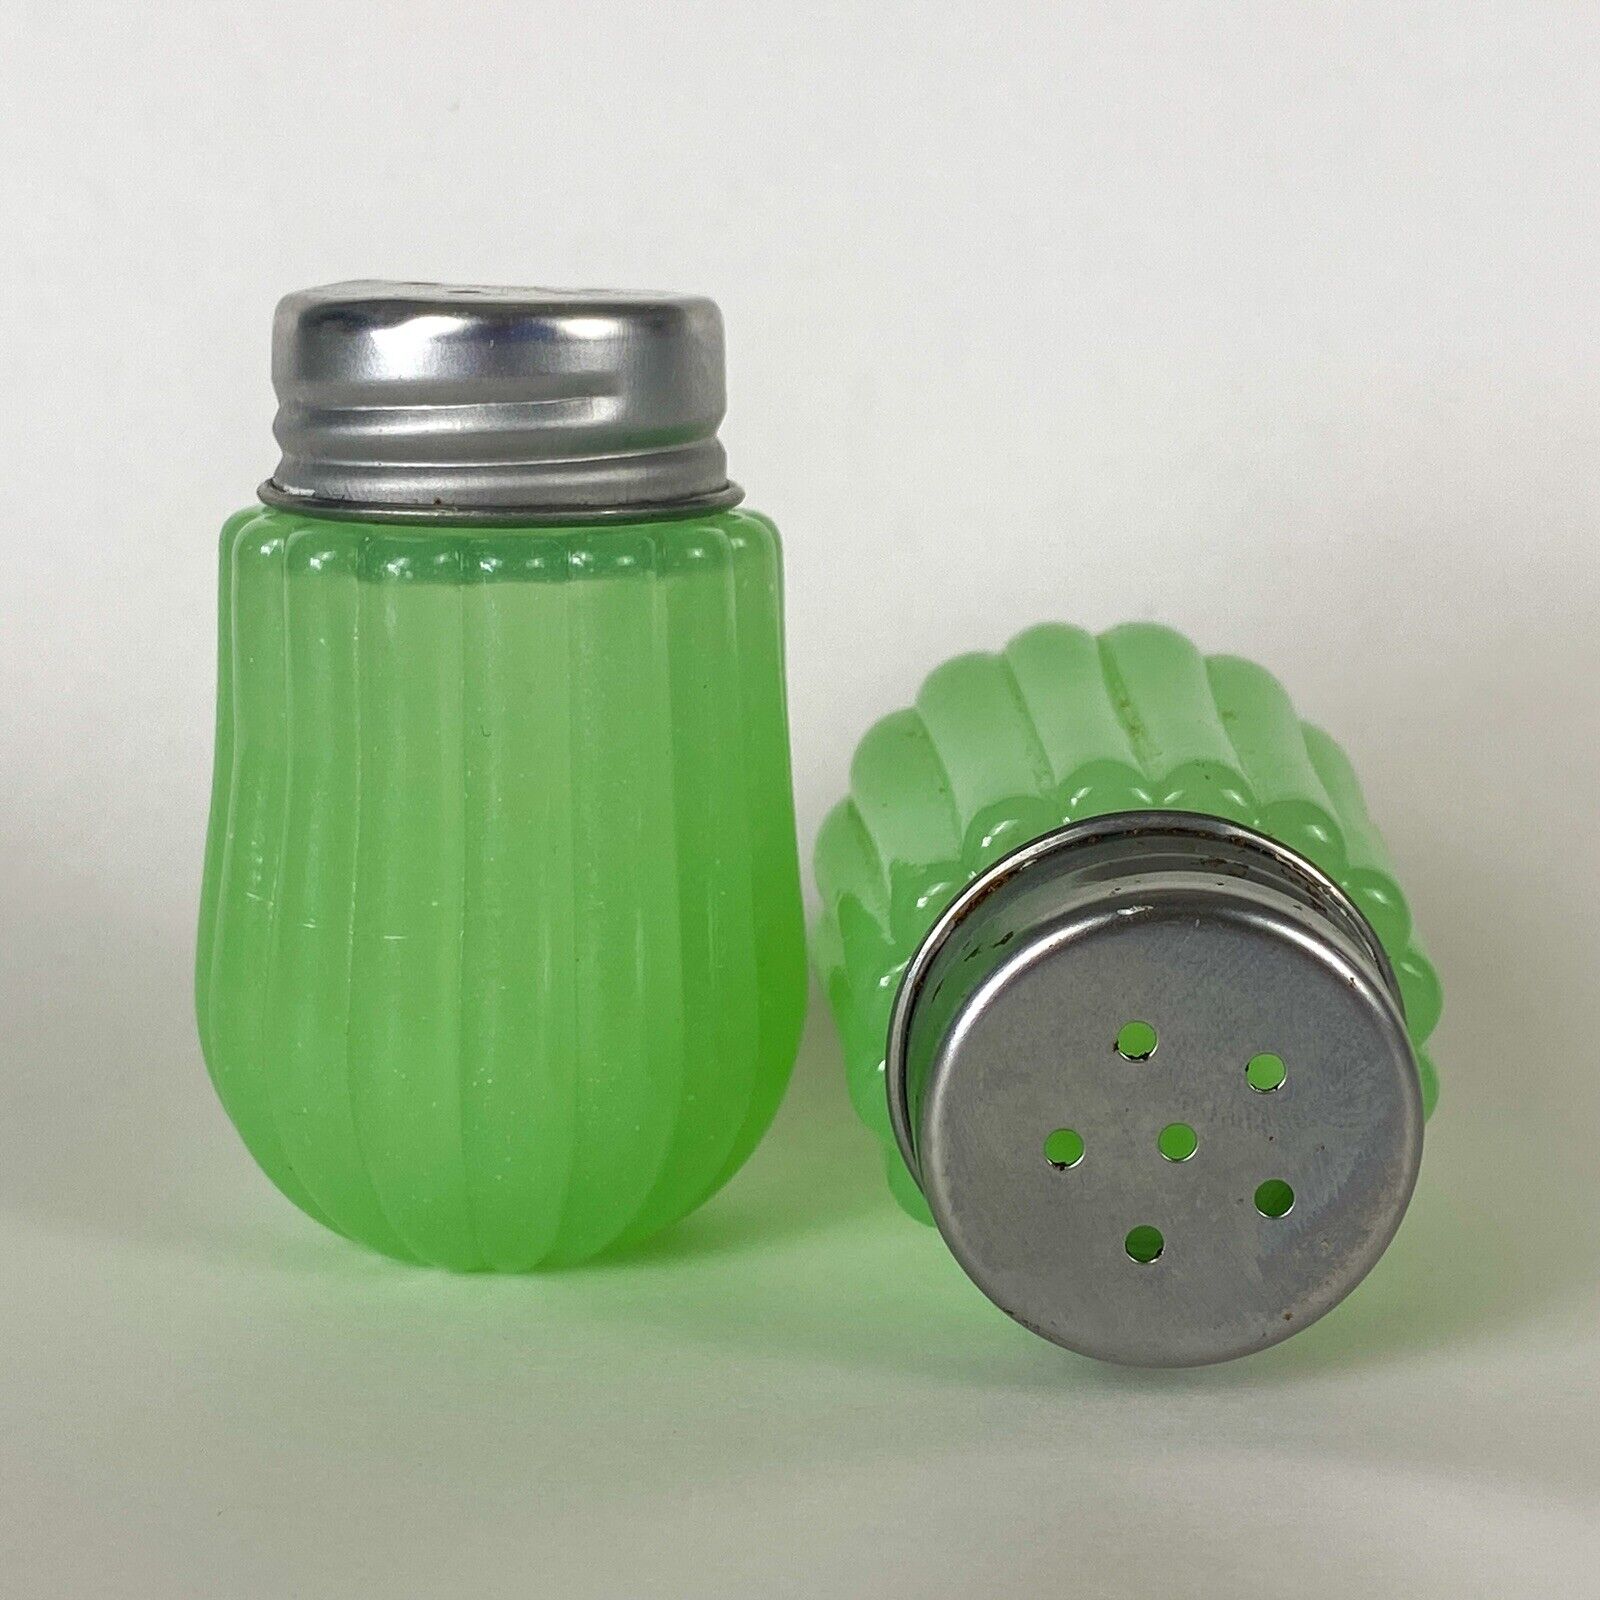 Pair Jade Green Salt and Pepper Shakers Jadeite Glass Vintage Retro Style Ribbed